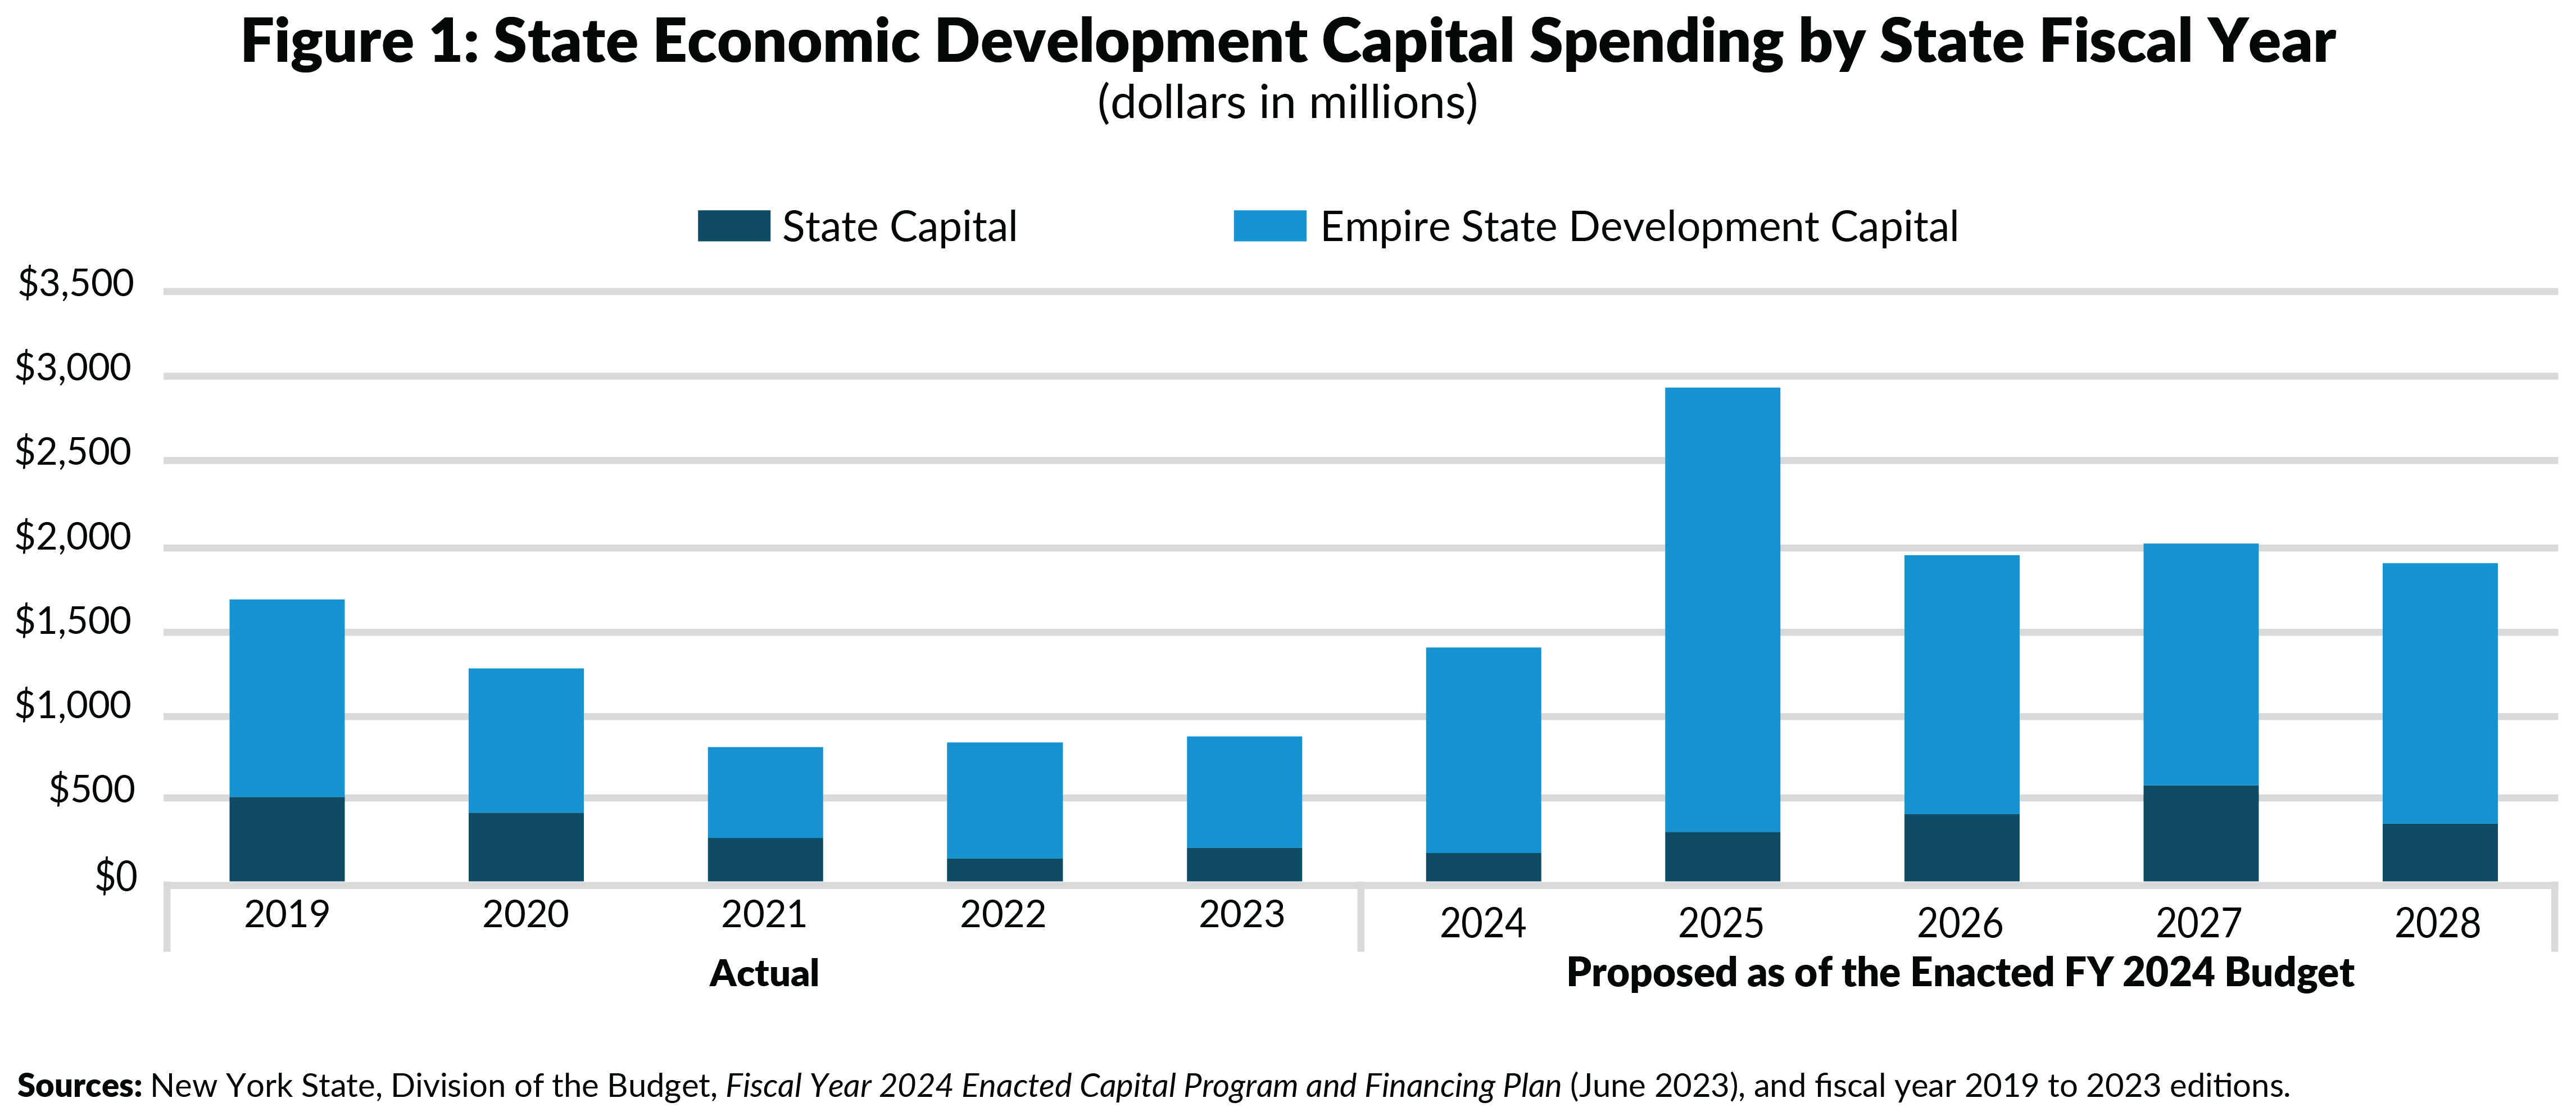 Figure 1: State Economic Development Capital Spending by State Fiscal Year